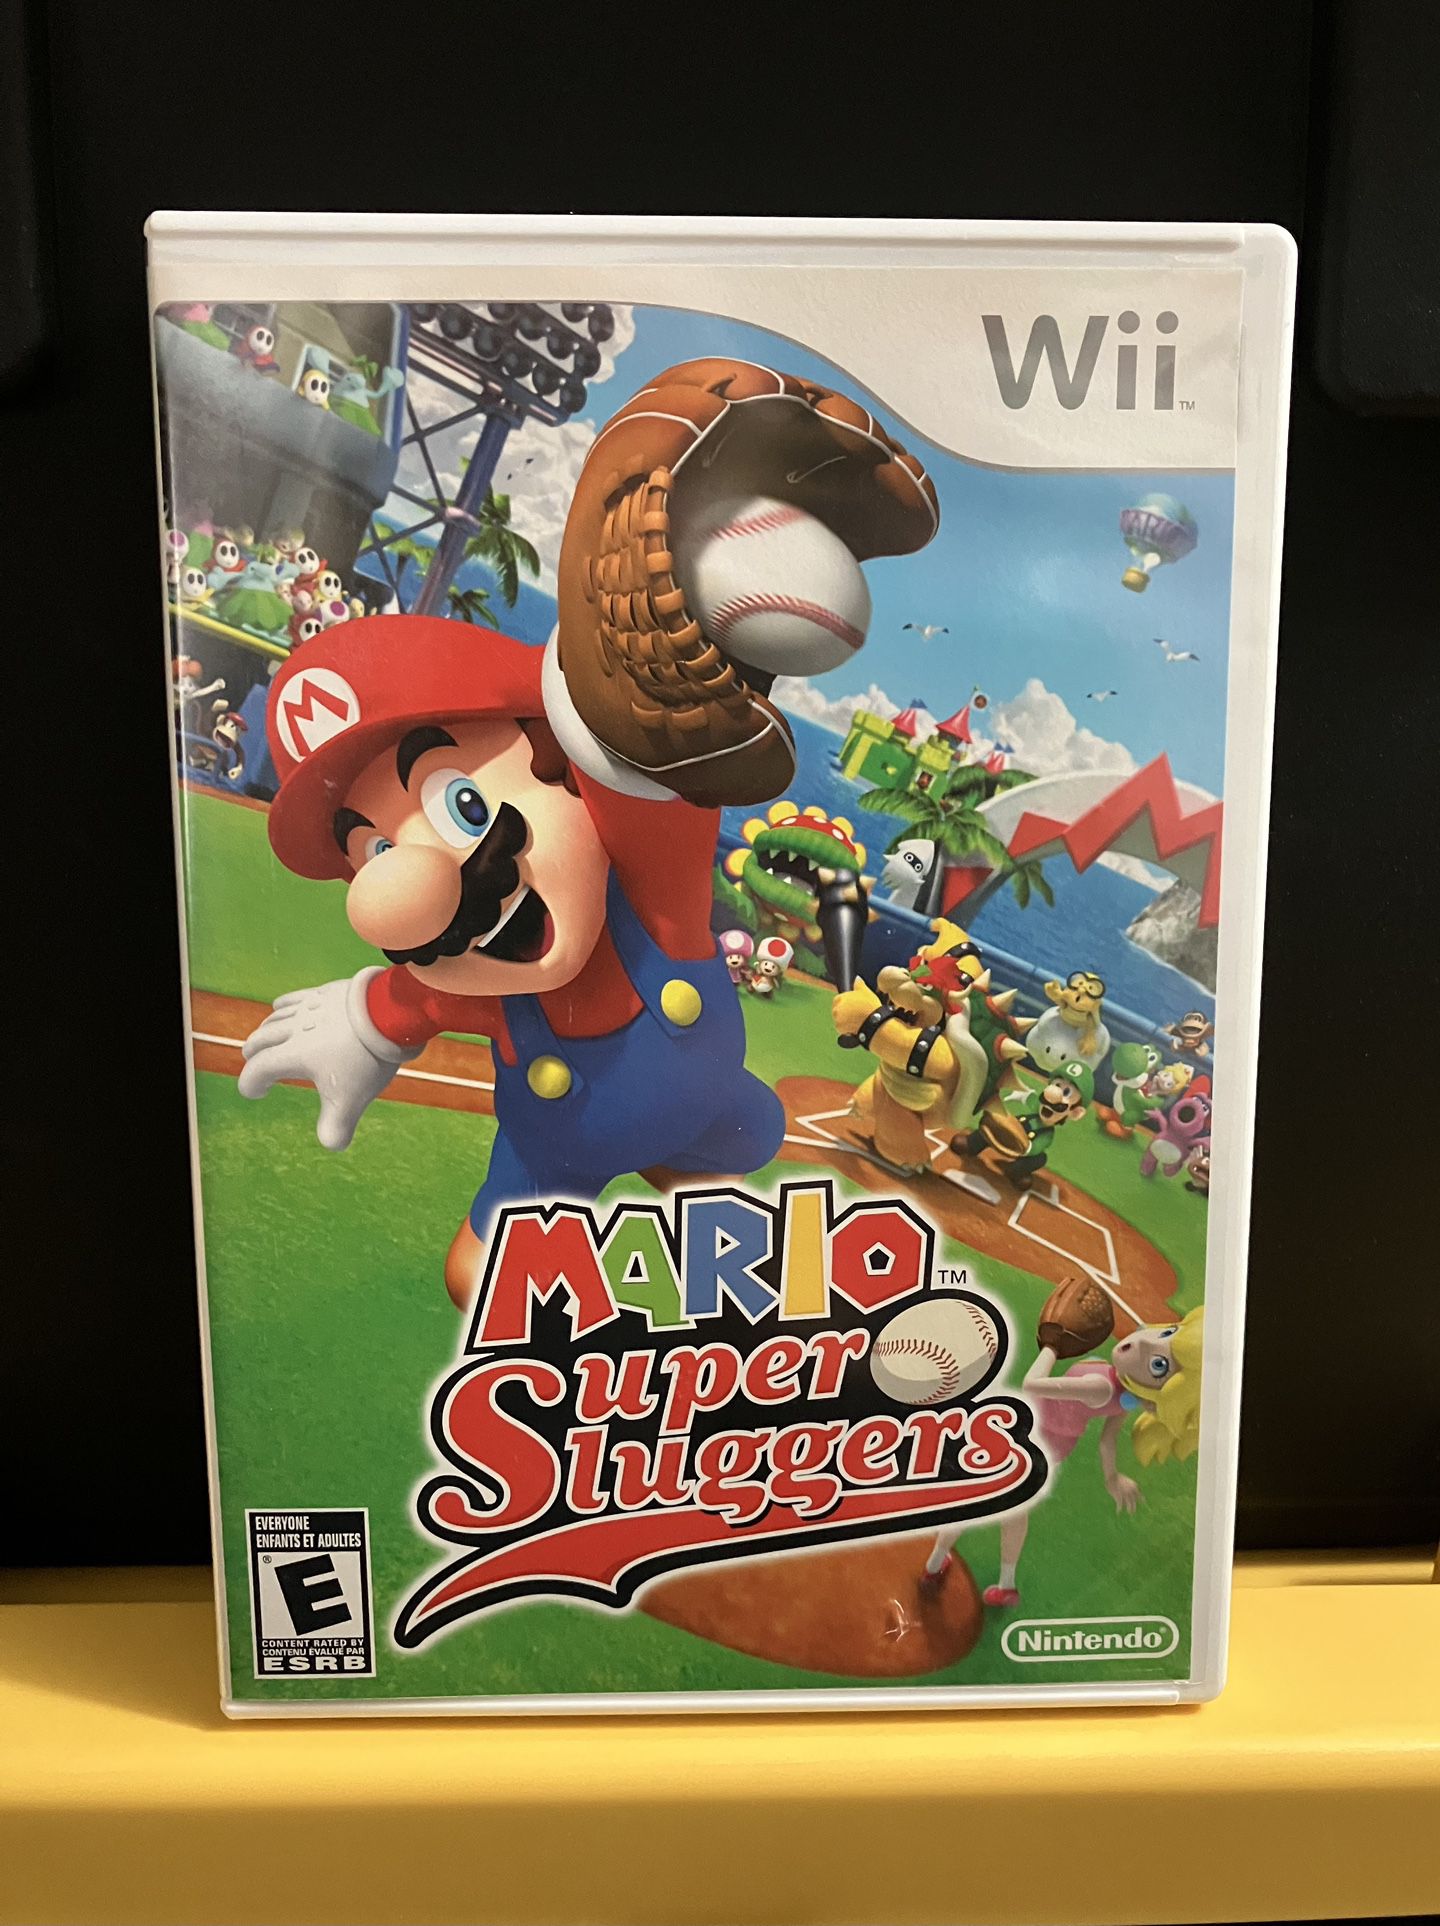 Mario Super Sluggers Baseball for Nintendo Wii video game console system bros brothers